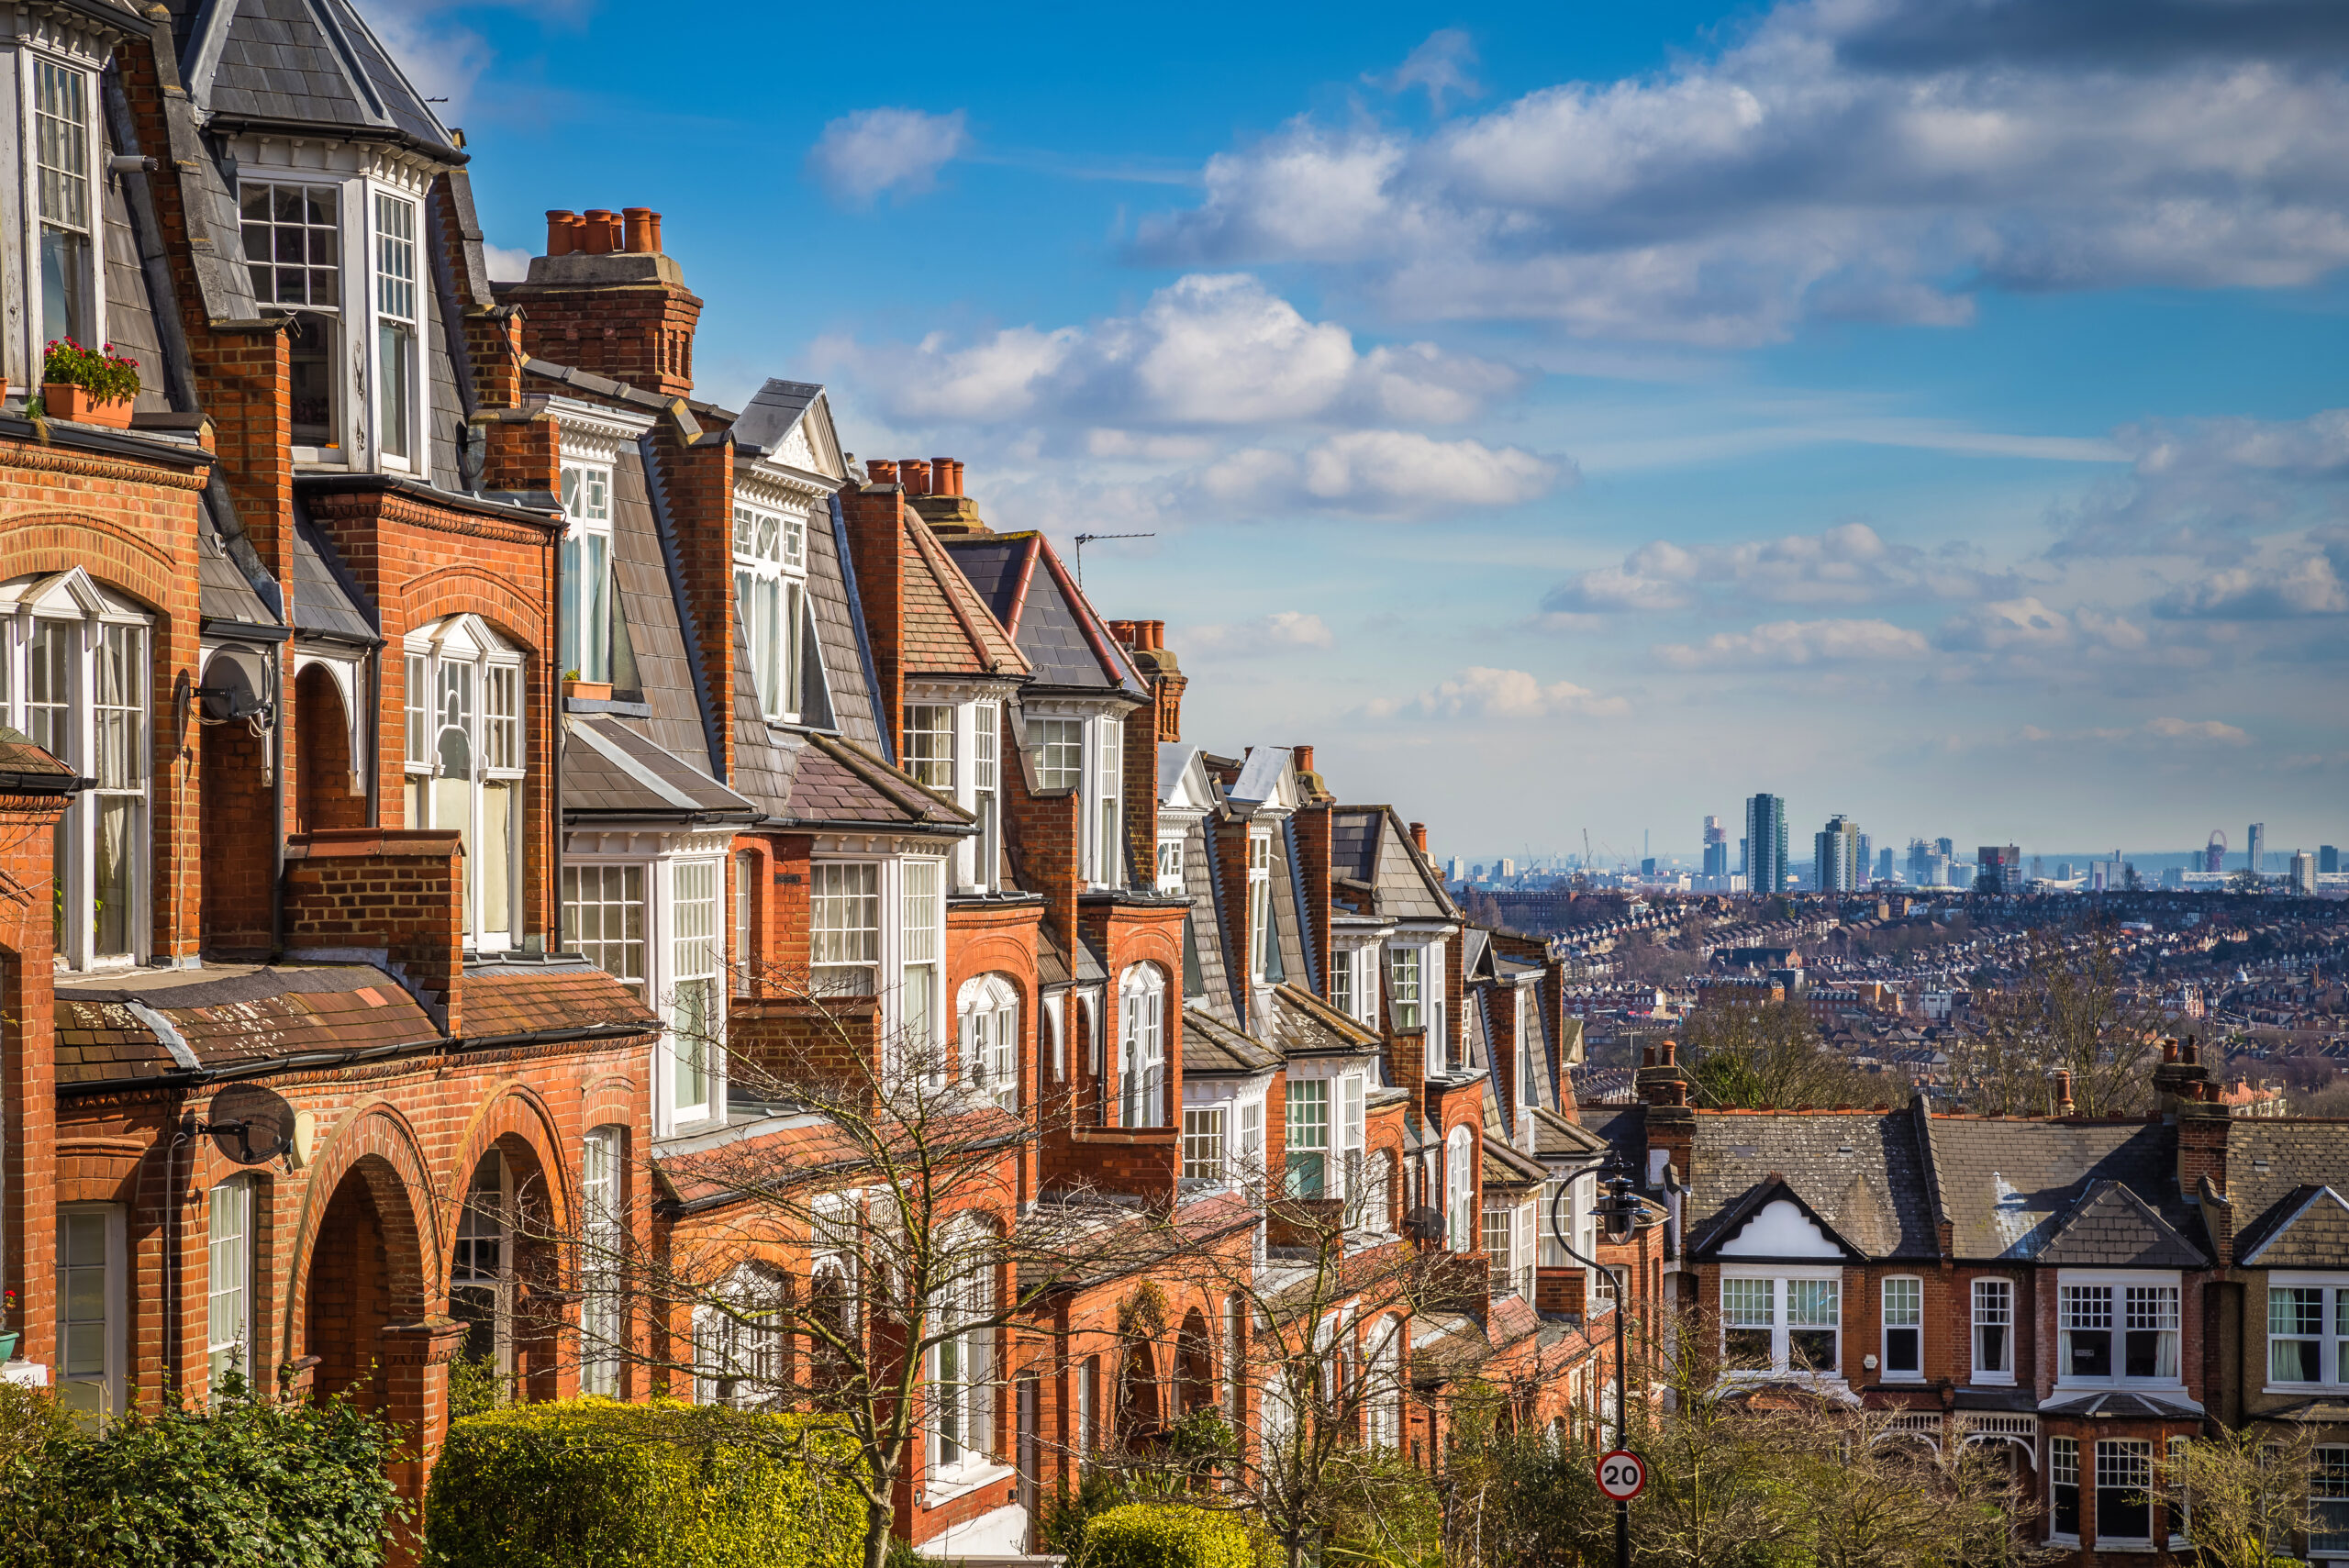 Residential retrofits must reach one million per year by 2030 to meet UK net zero aim: How can copper support this demand?